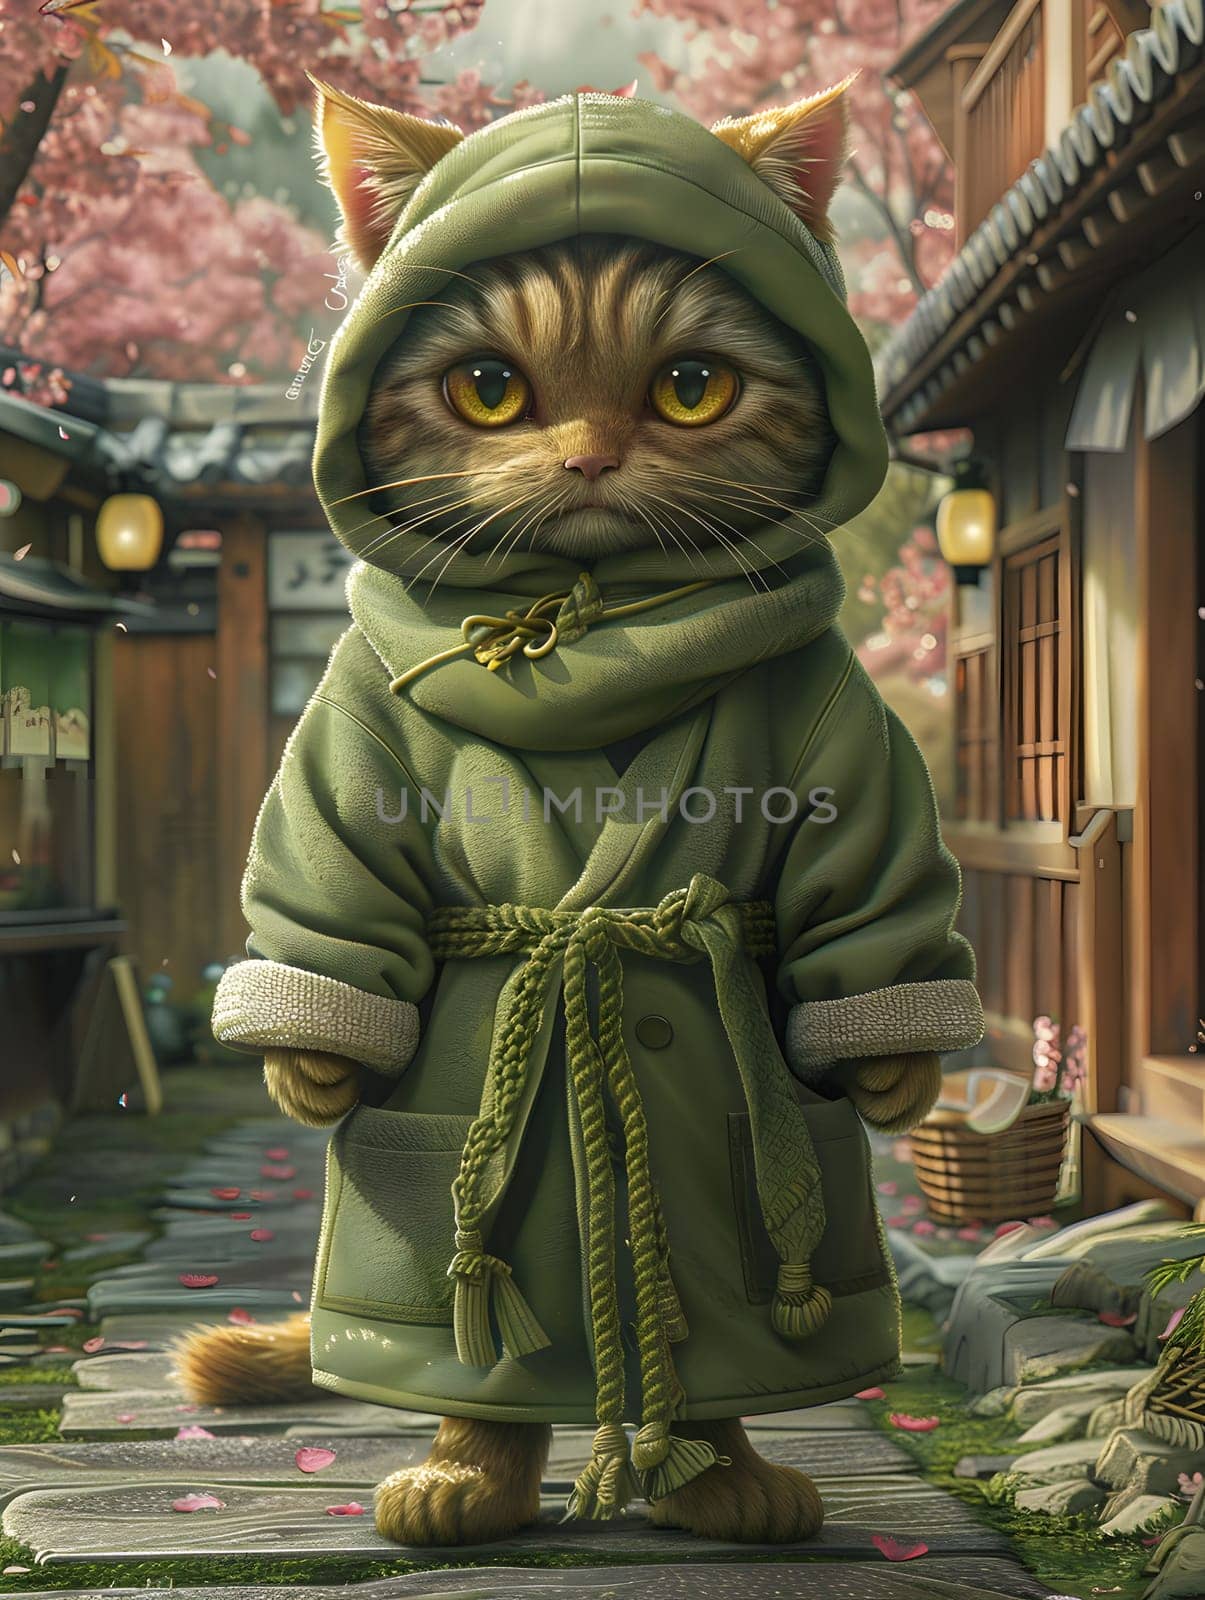 A Felidae cartoon character wearing a green robe and hood, with whiskers and a snout. This small to mediumsized terrestrial animal is a fictional character in a building